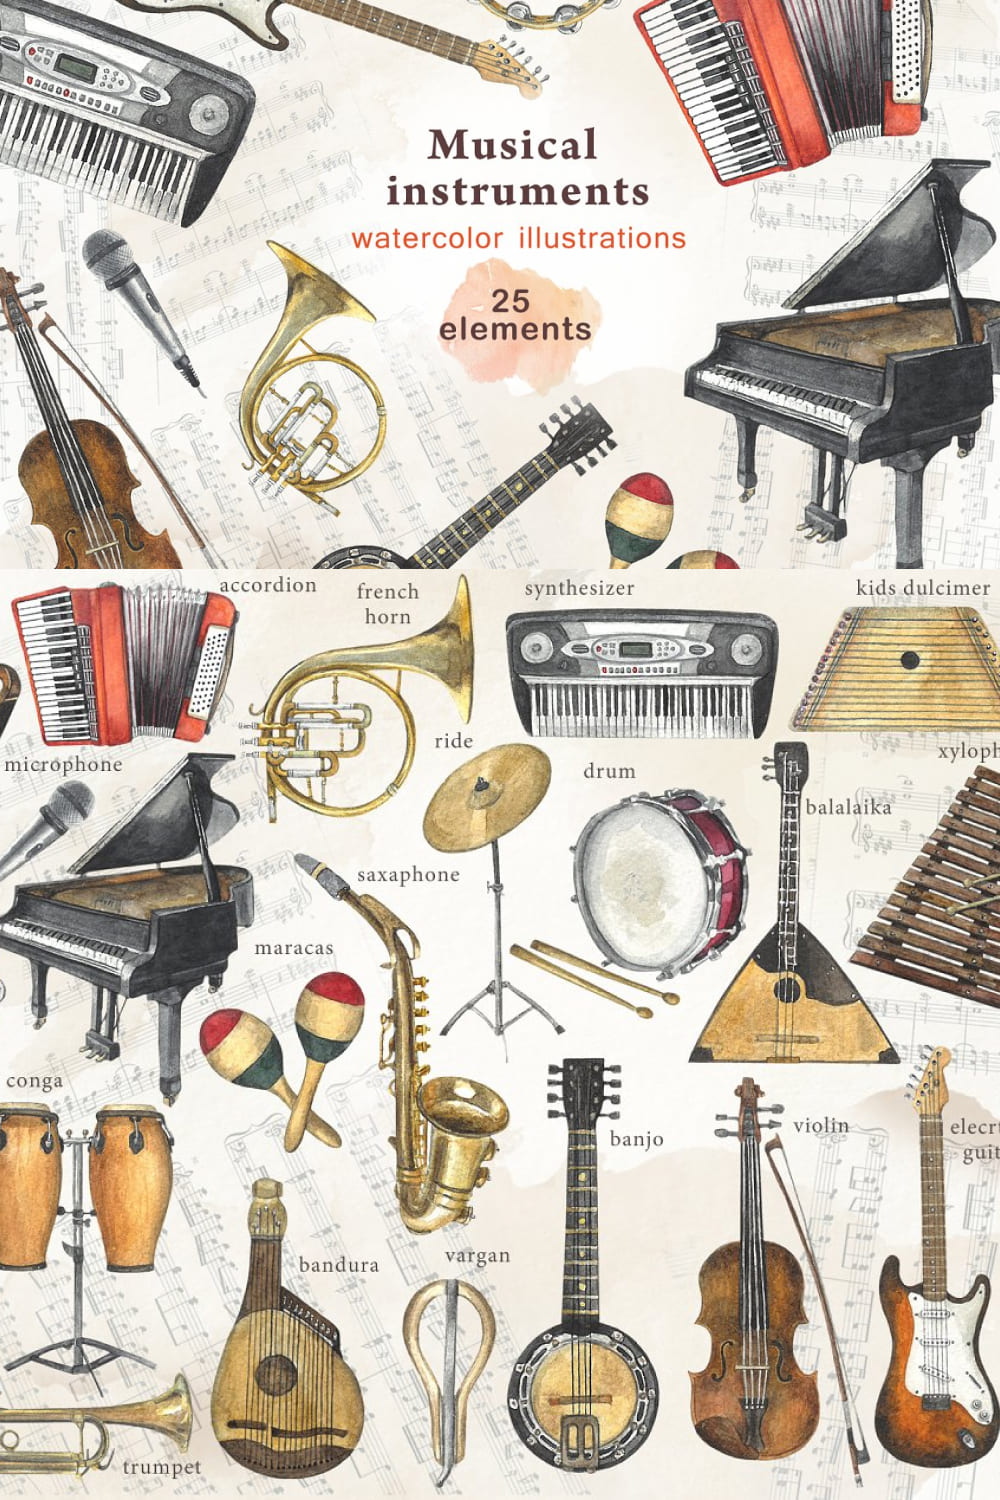 Set of irresistible watercolor images of musical instruments.